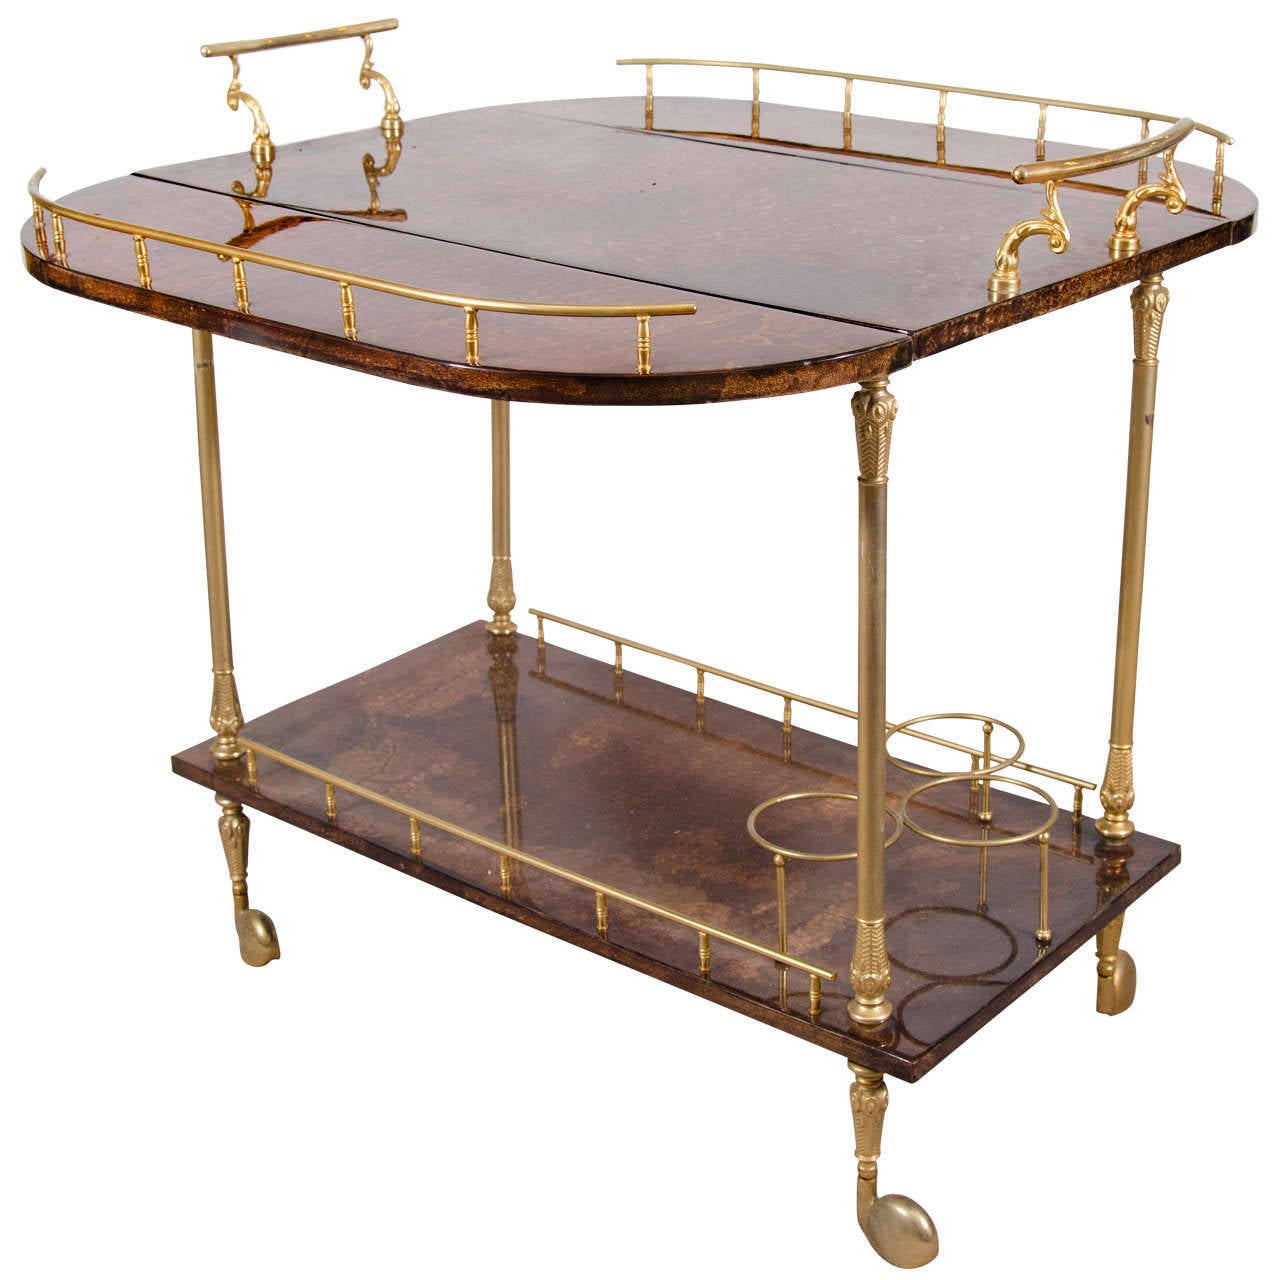 A nearly pristine example of a vintage Aldo Tura bar cart in elegant polished brass and mottled chocolate brown lacquered goatskin with fold down sides, and three wine or bottle holders. 
Fold size: 30 L x 17